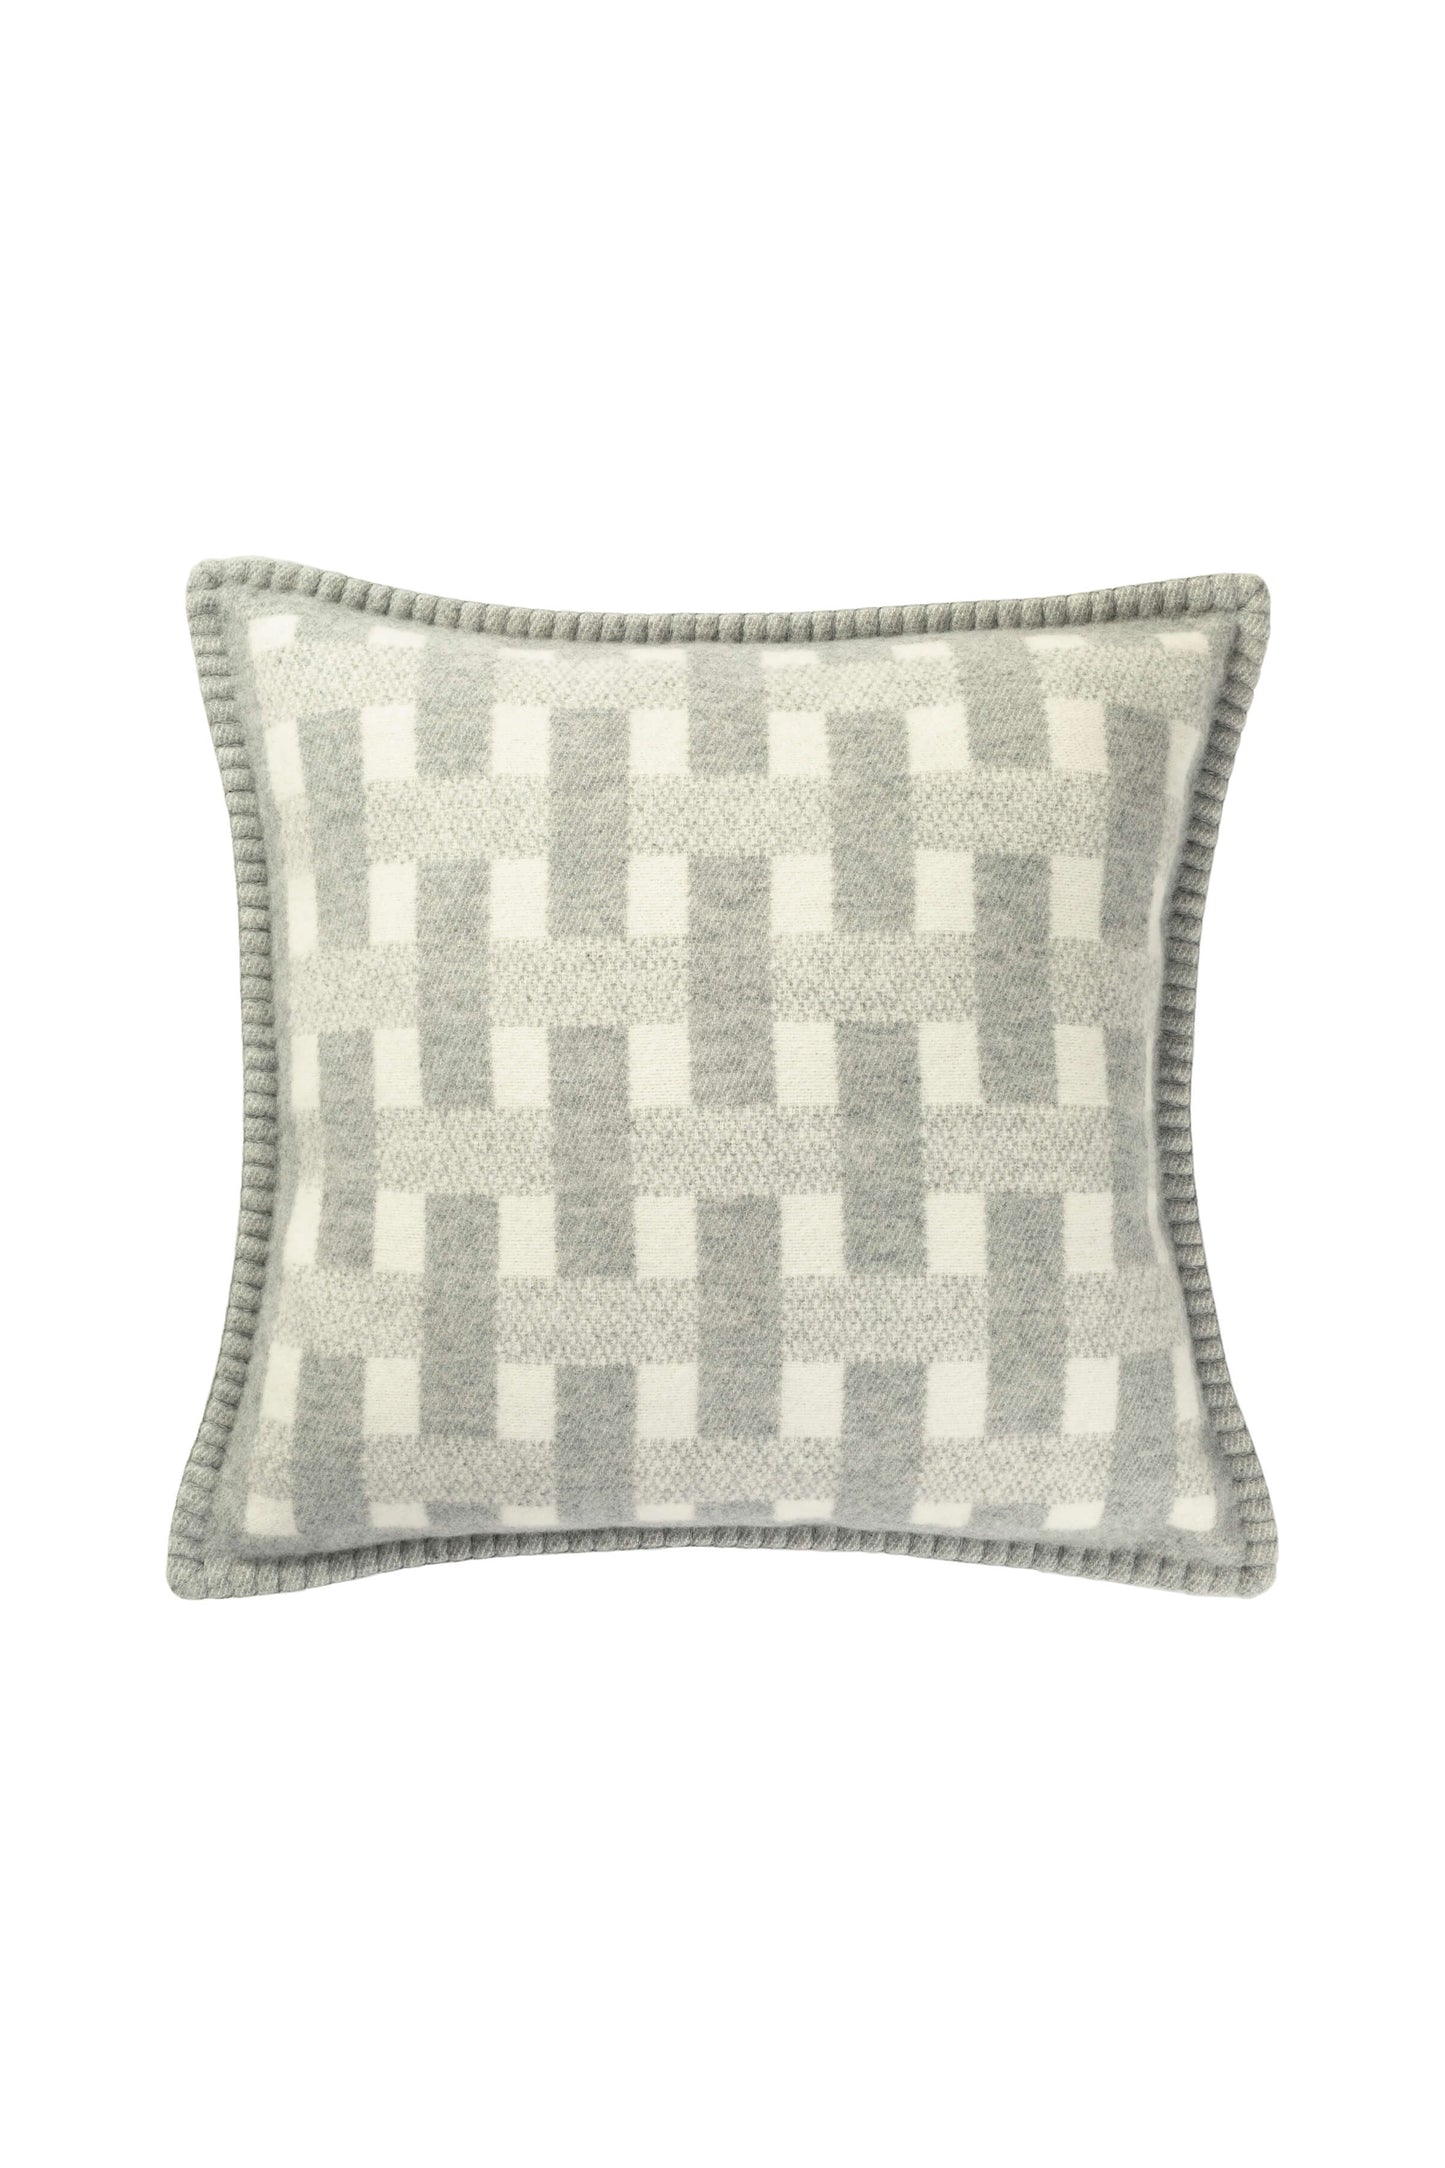 Johnstons of Elgin 2024 Home Collection Light Grey & White Blanket Stitched Basketweave Cushion PB000059RU7446ONE